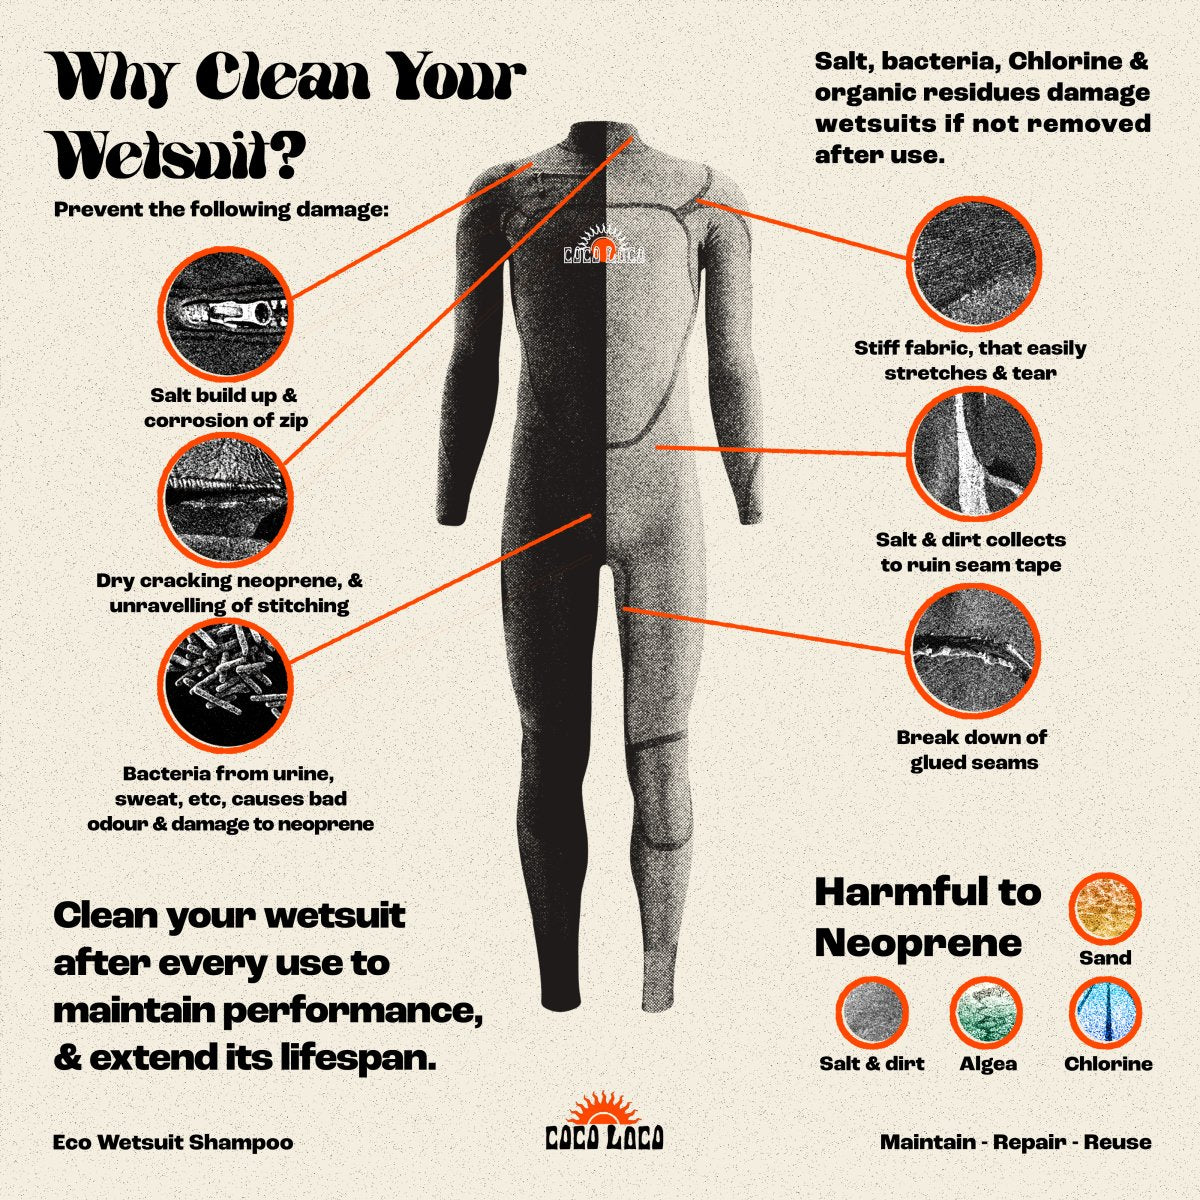 why clean your wetsuit - coco loco wetsuit shampoo cleaner